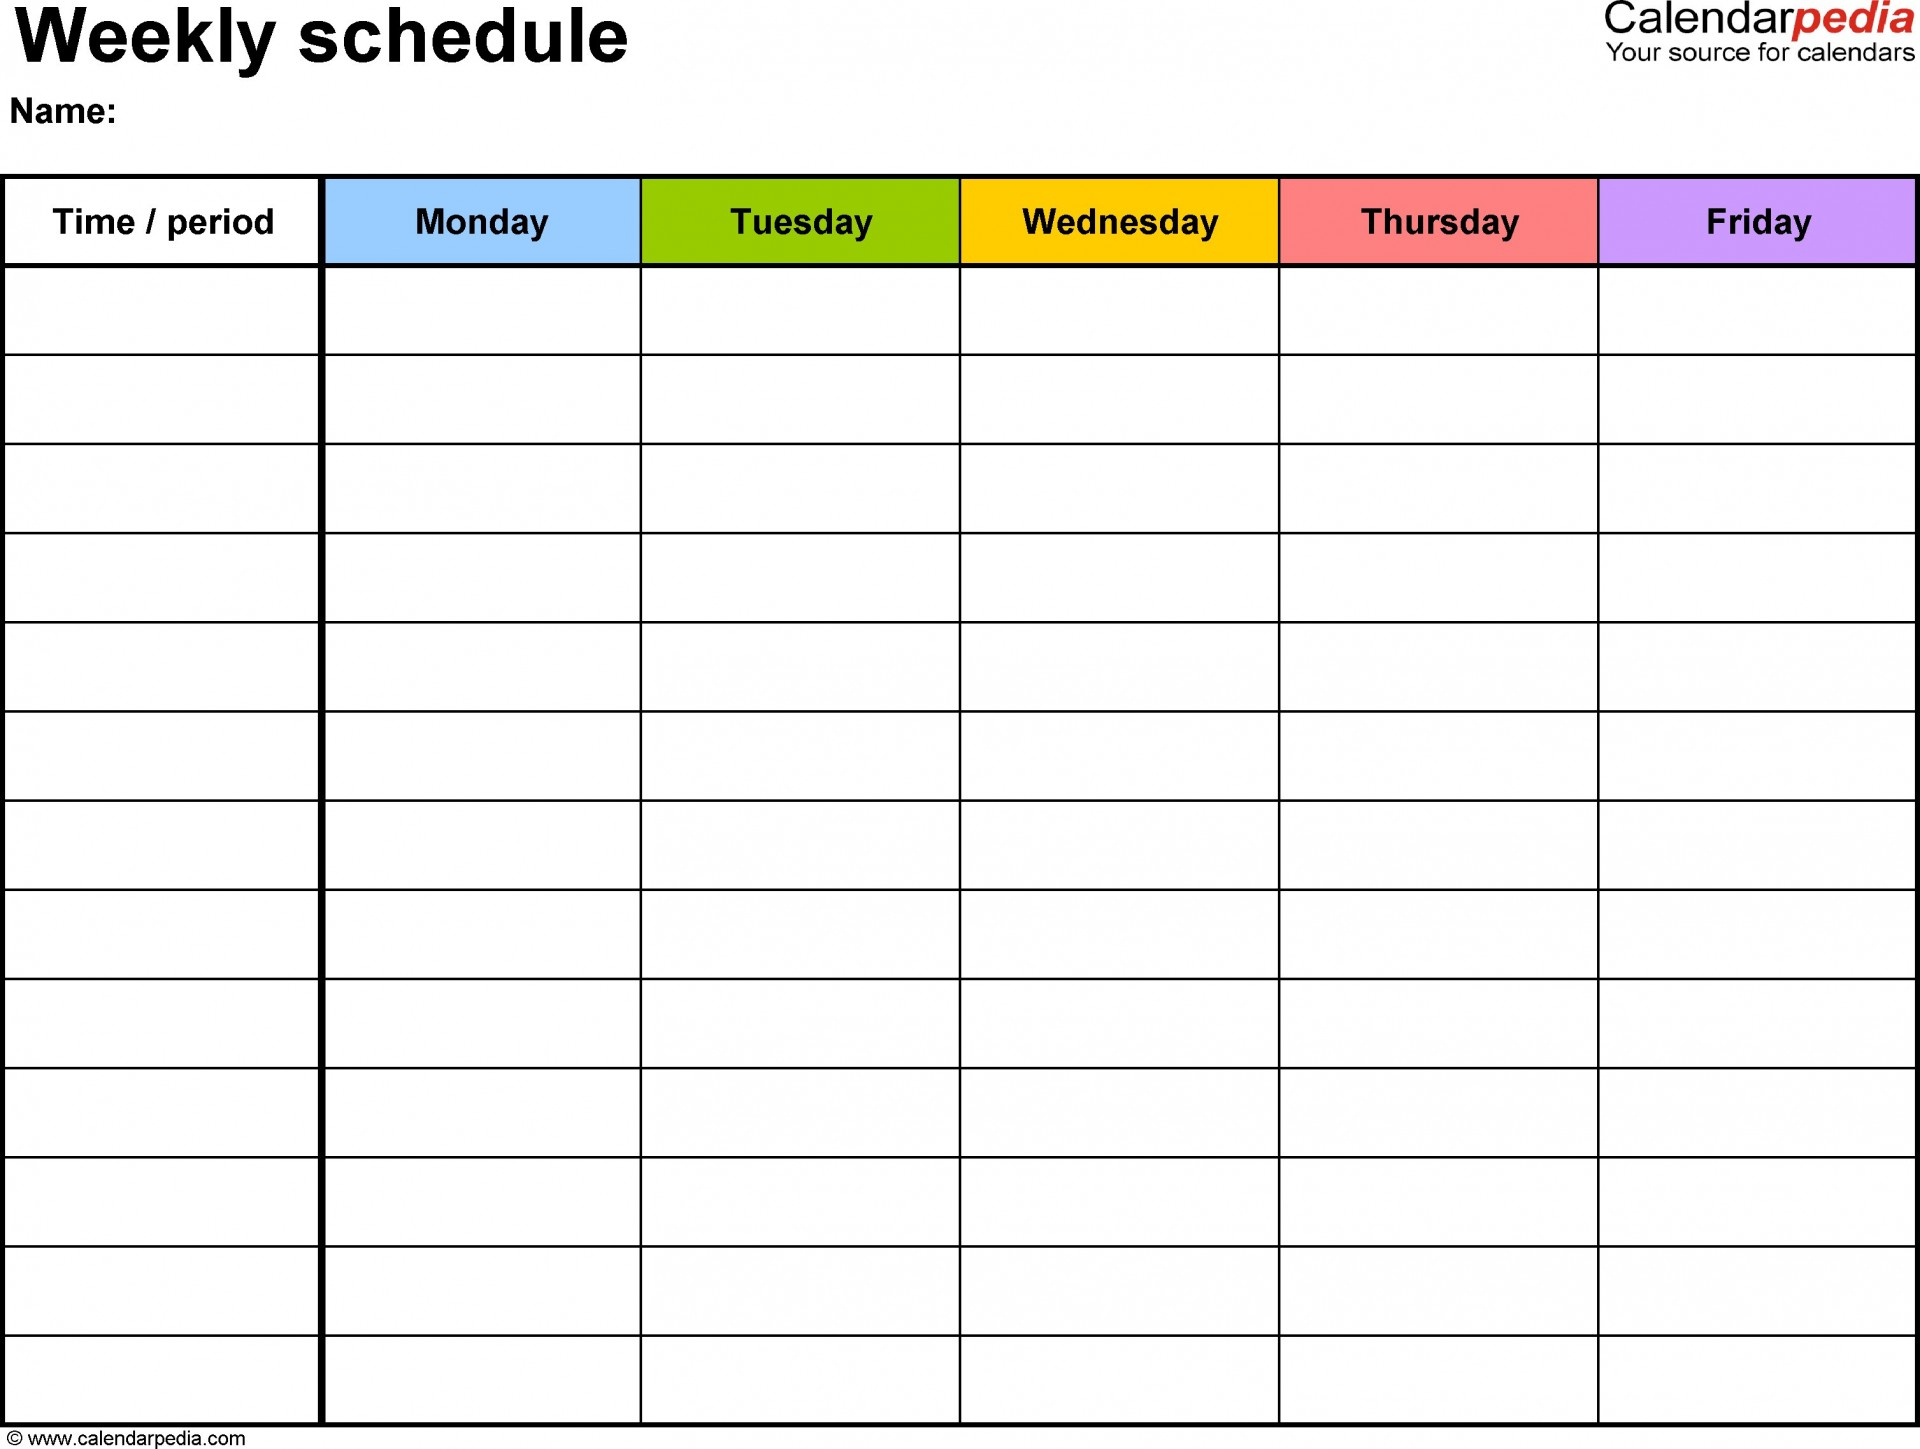 Medication Schedule Spreadsheet In 014 Daily Medication Schedule Template Spreadsheet Awesome Monthly